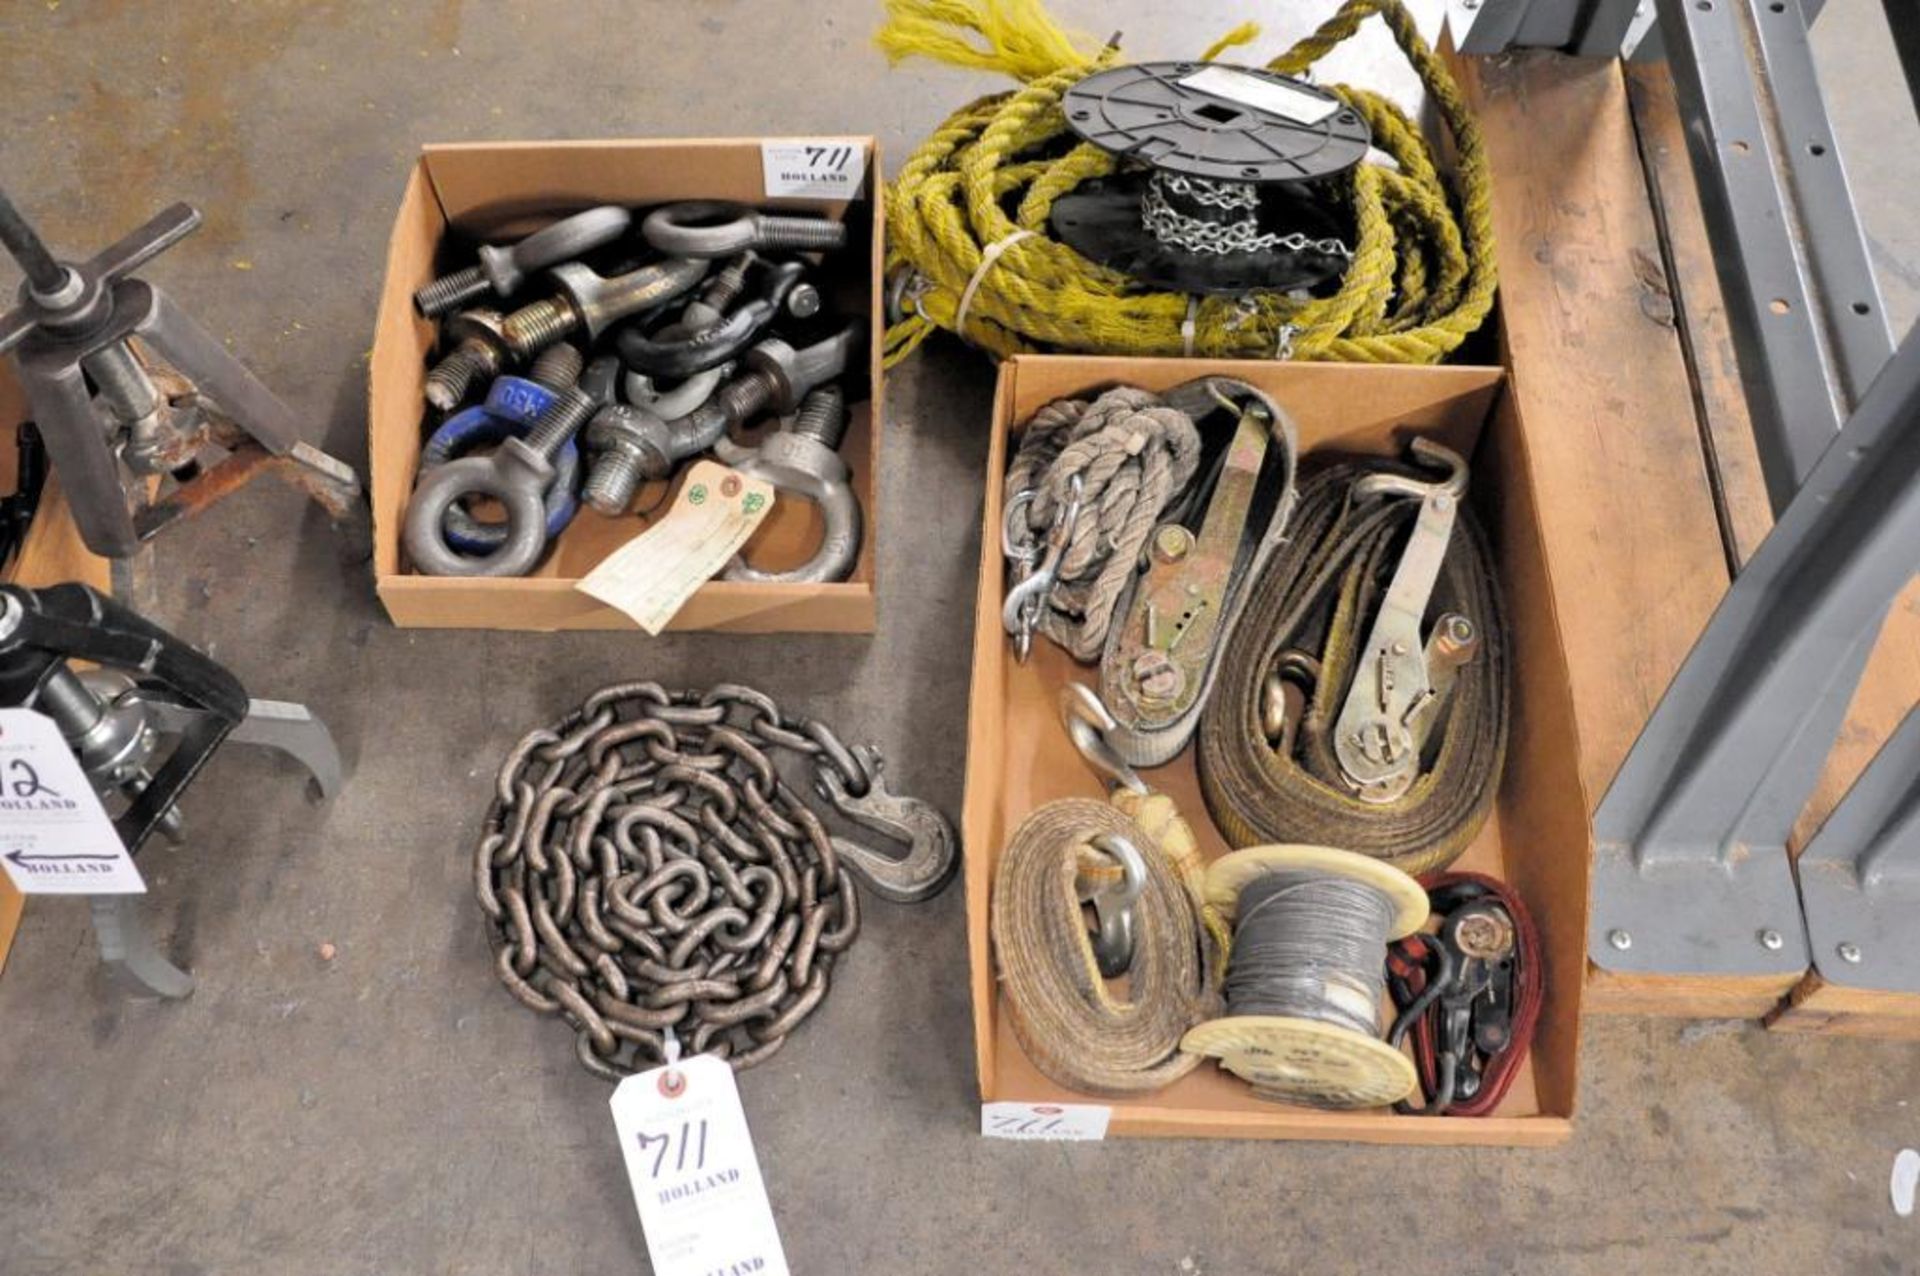 Lot - Ratchet Straps, Rope and 1-Hook Chain with Eye Bolts in (1) Box